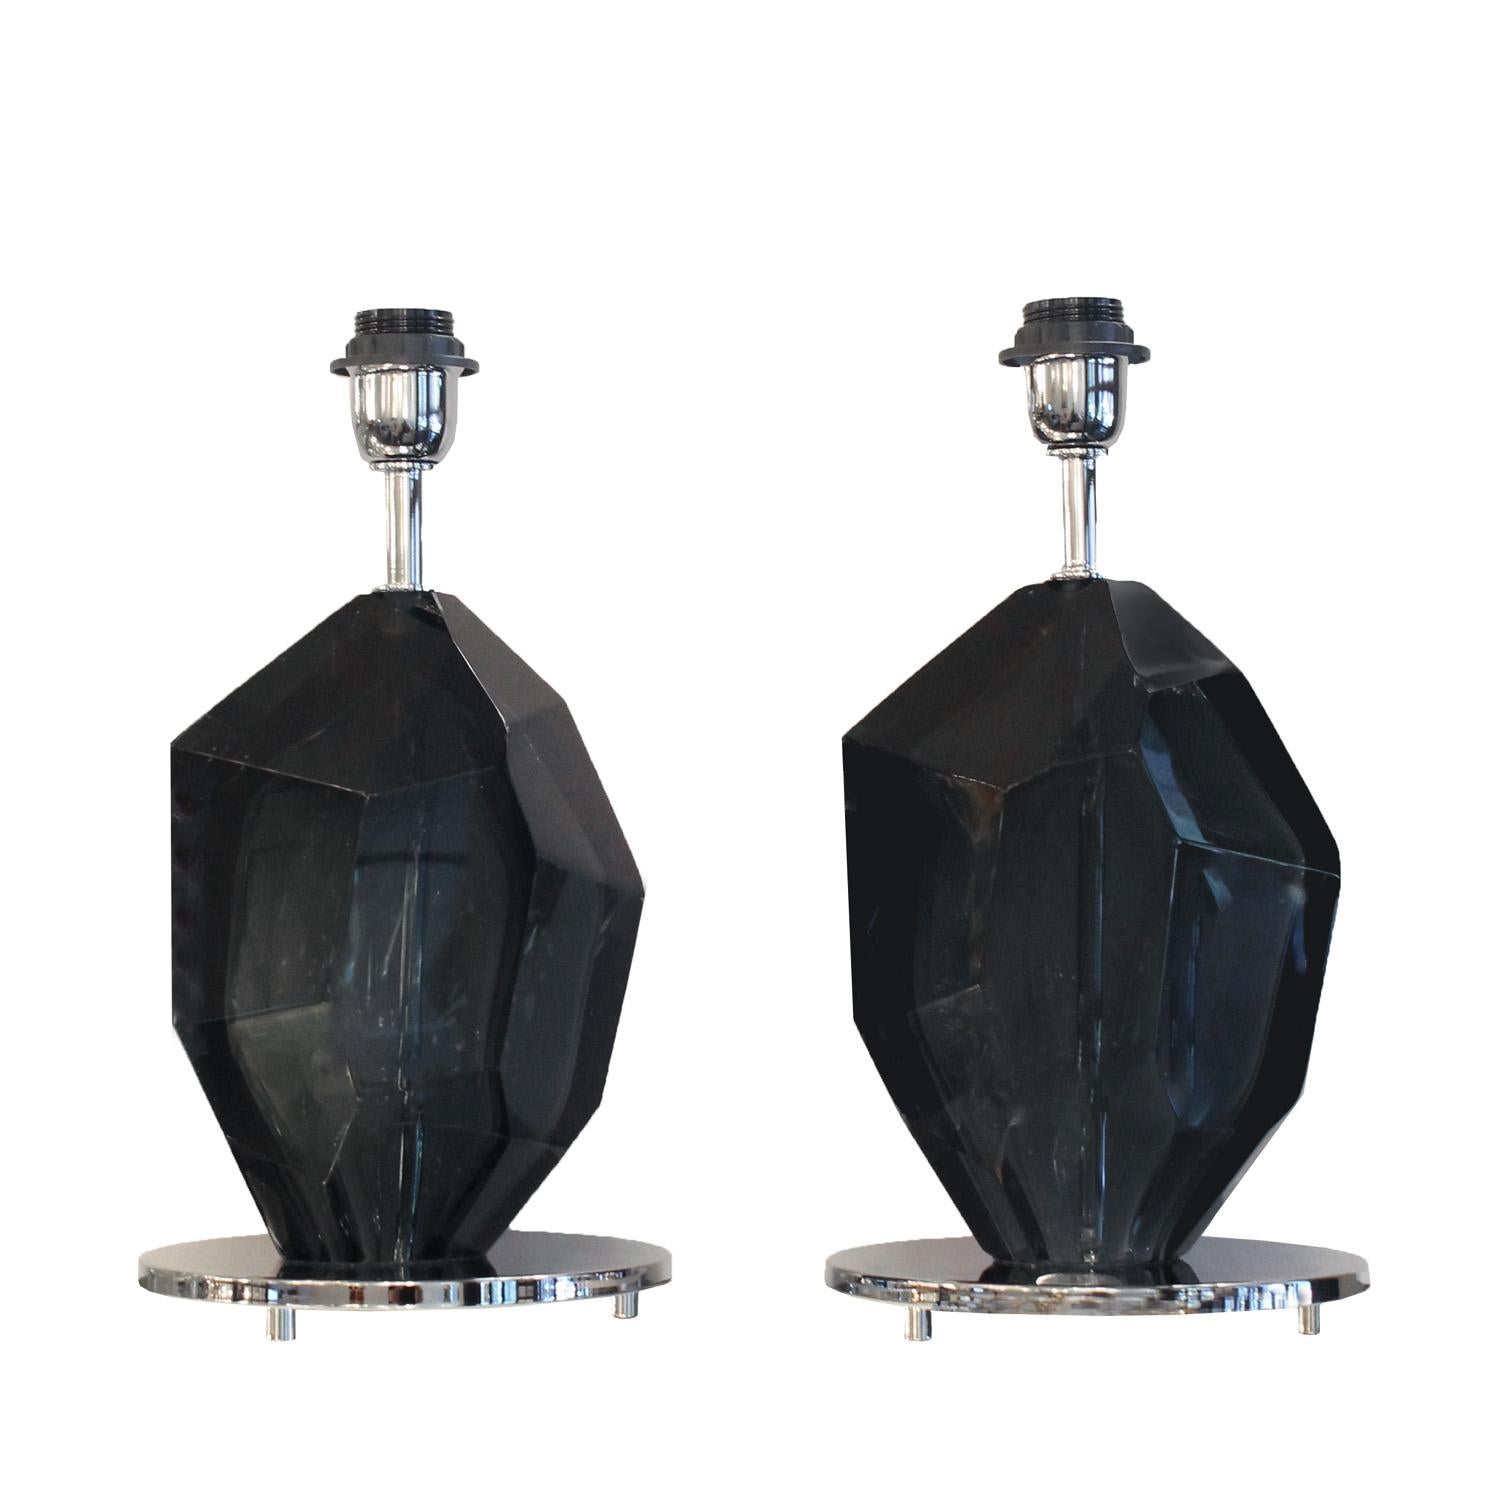 Pair of Murano dark gray glass gem cut table lamps with chrome hardware and base. Italy 2021.


Customization of size, glass color and hardware finish is available. Please inquire with Venfield.